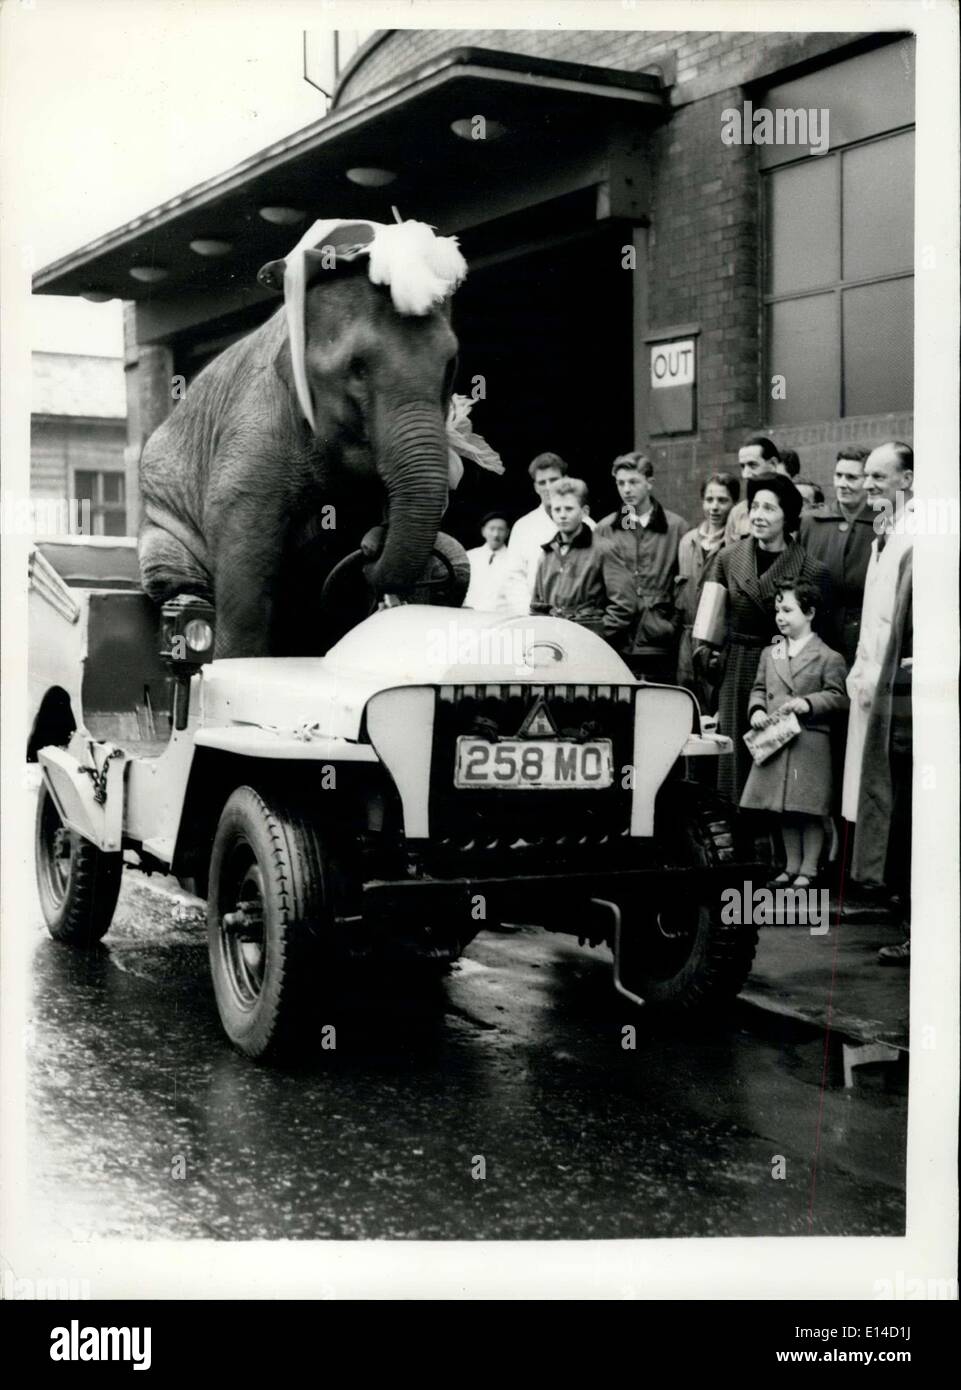 Apr. 17, 2012 - Animals Arrive For Bertram Mills Circus The Elephant Driver: Animals from the Bertram Mills winter quarters at Ascot - arrived by train at Addison Road Station today - for the Bertram Mills Circus, which opens at Olympia on December 20th. Photo shows ''Kam'' a four-year old elephant -amazed onlookers at Olympia today as he drove past at the wheel of a vehicle - and demonstrated his preess as a driver. The elephant drove in second gear. Stock Photo